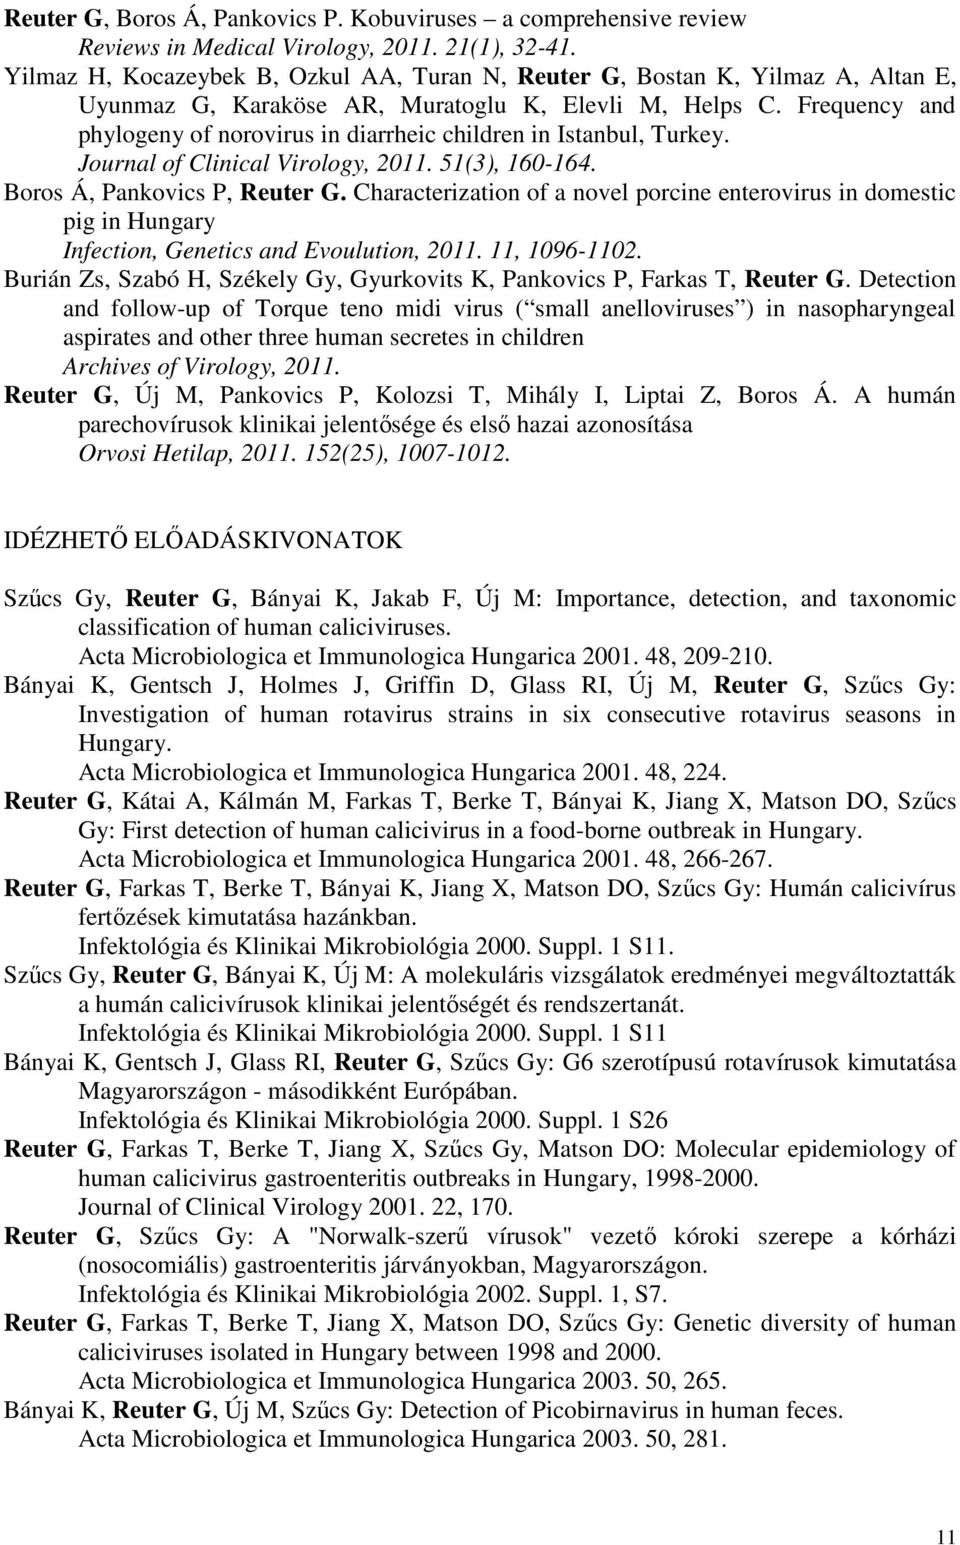 Frequency and phylogeny of norovirus in diarrheic children in Istanbul, Turkey. Journal of Clinical Virology, 2011. 51(3), 160-164. Boros Á, Pankovics P, Reuter G.